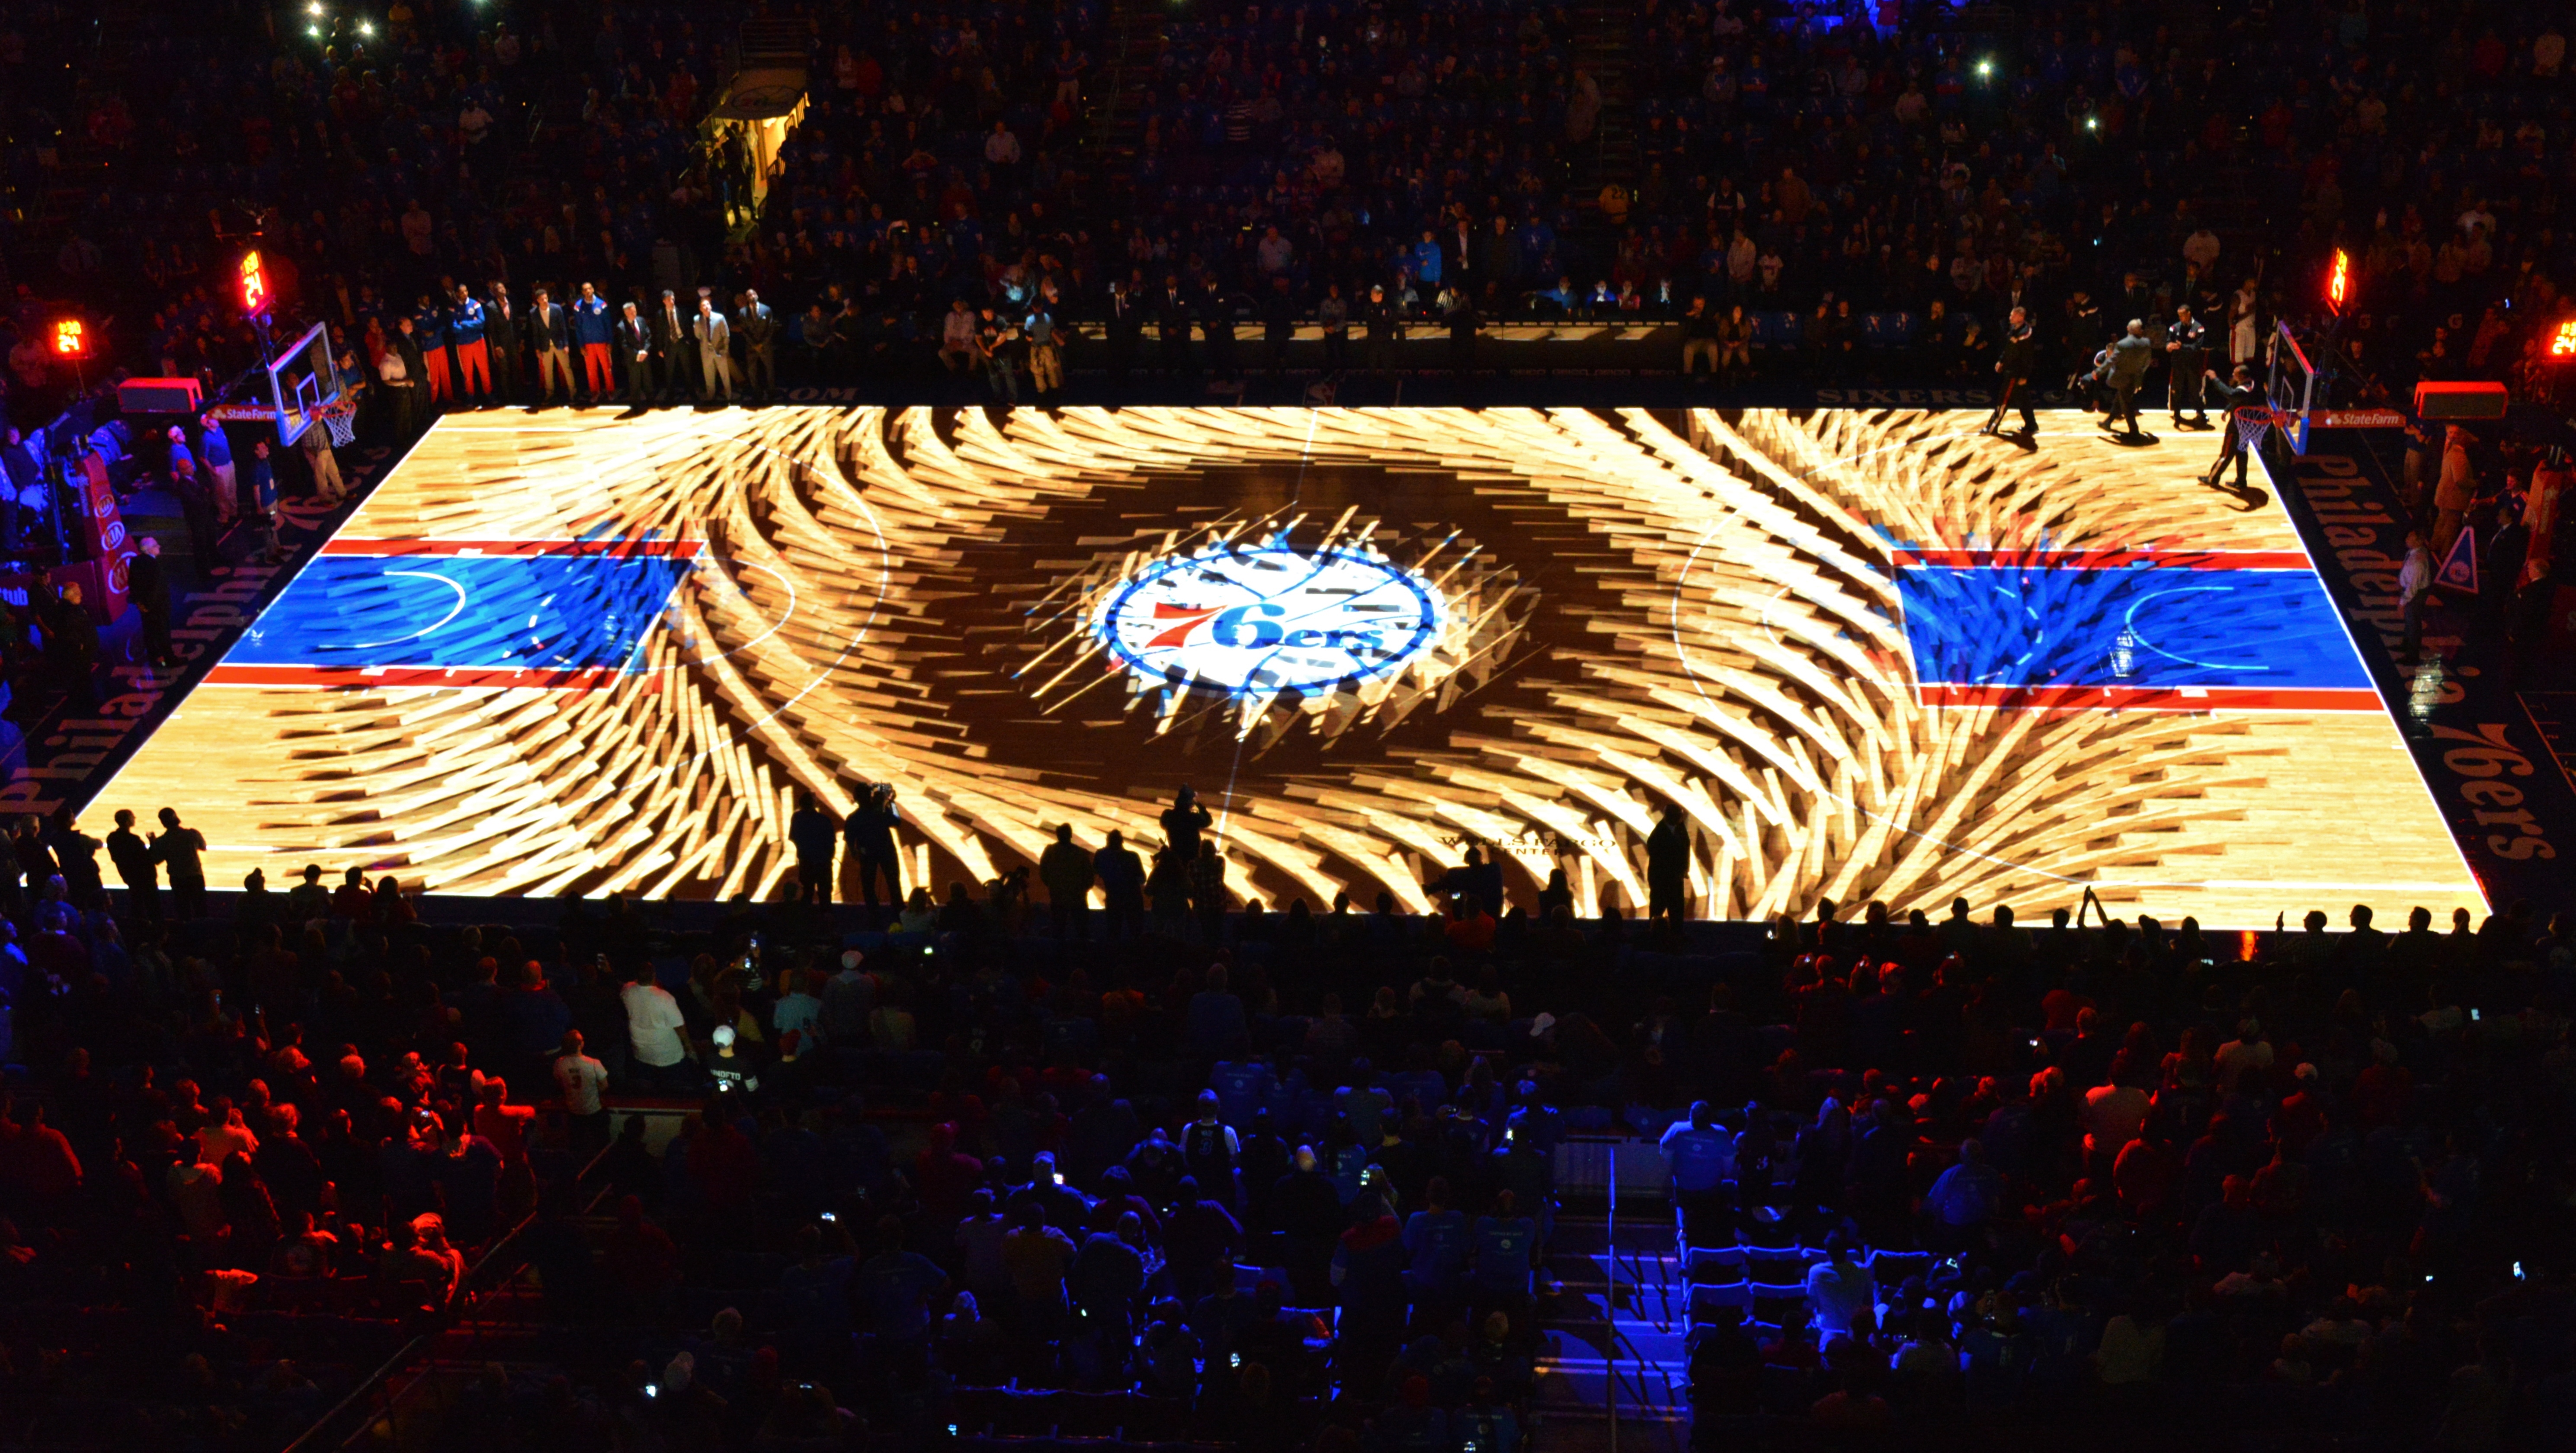 Trends in Projection Mapping & Lighting: Sports Arena Projection Lighting